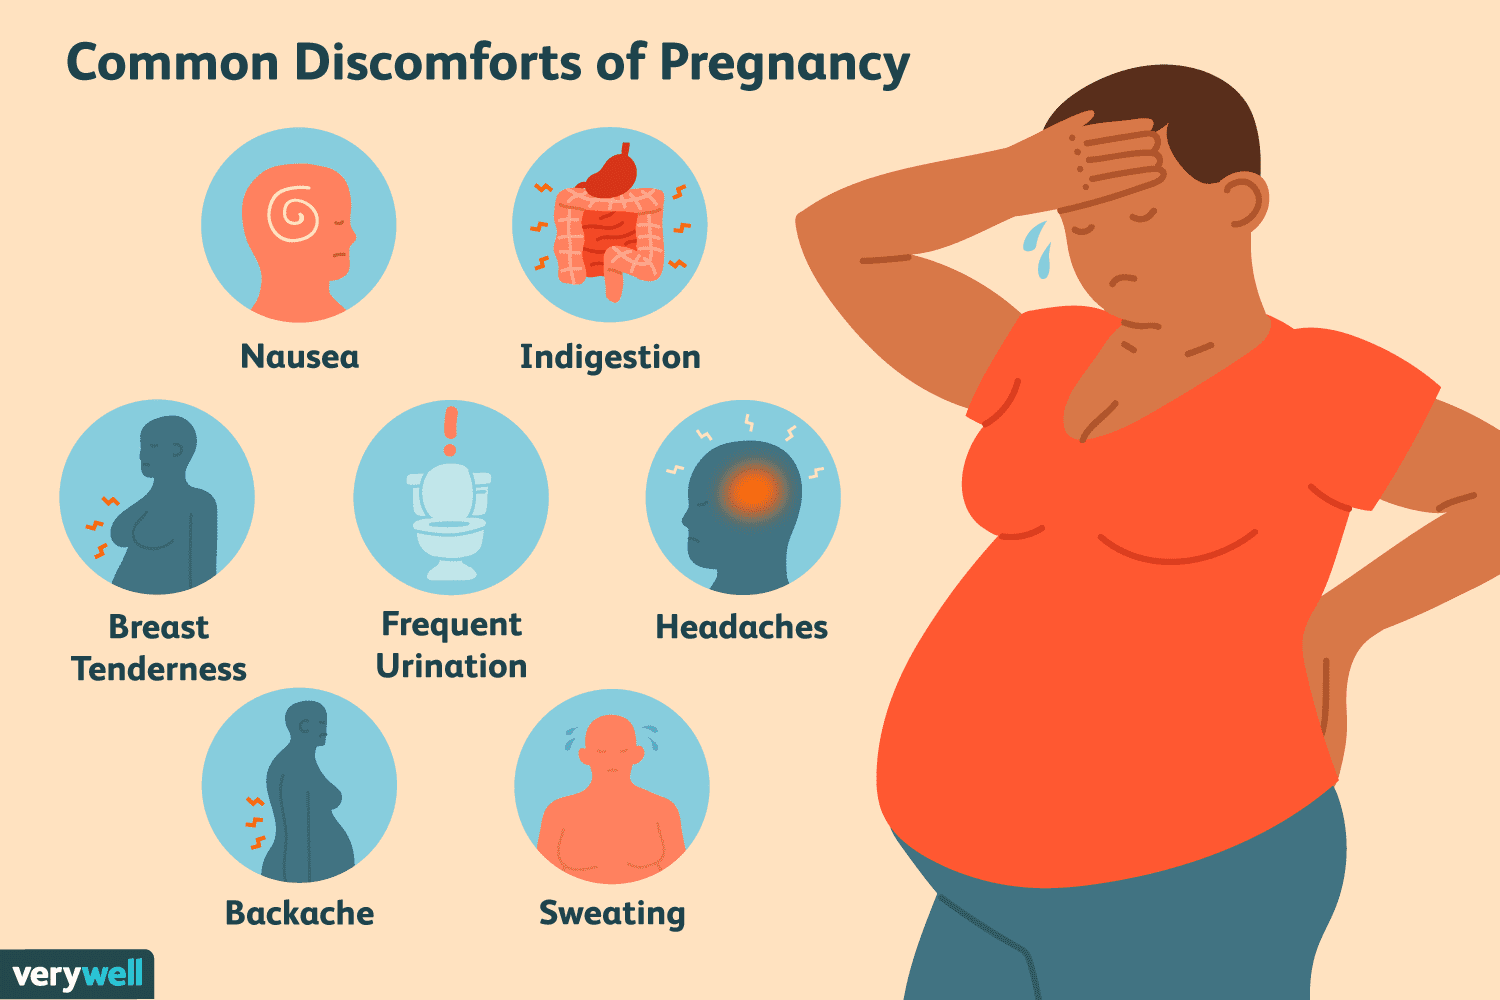 How To Deal With Indigestion In Pregnancy